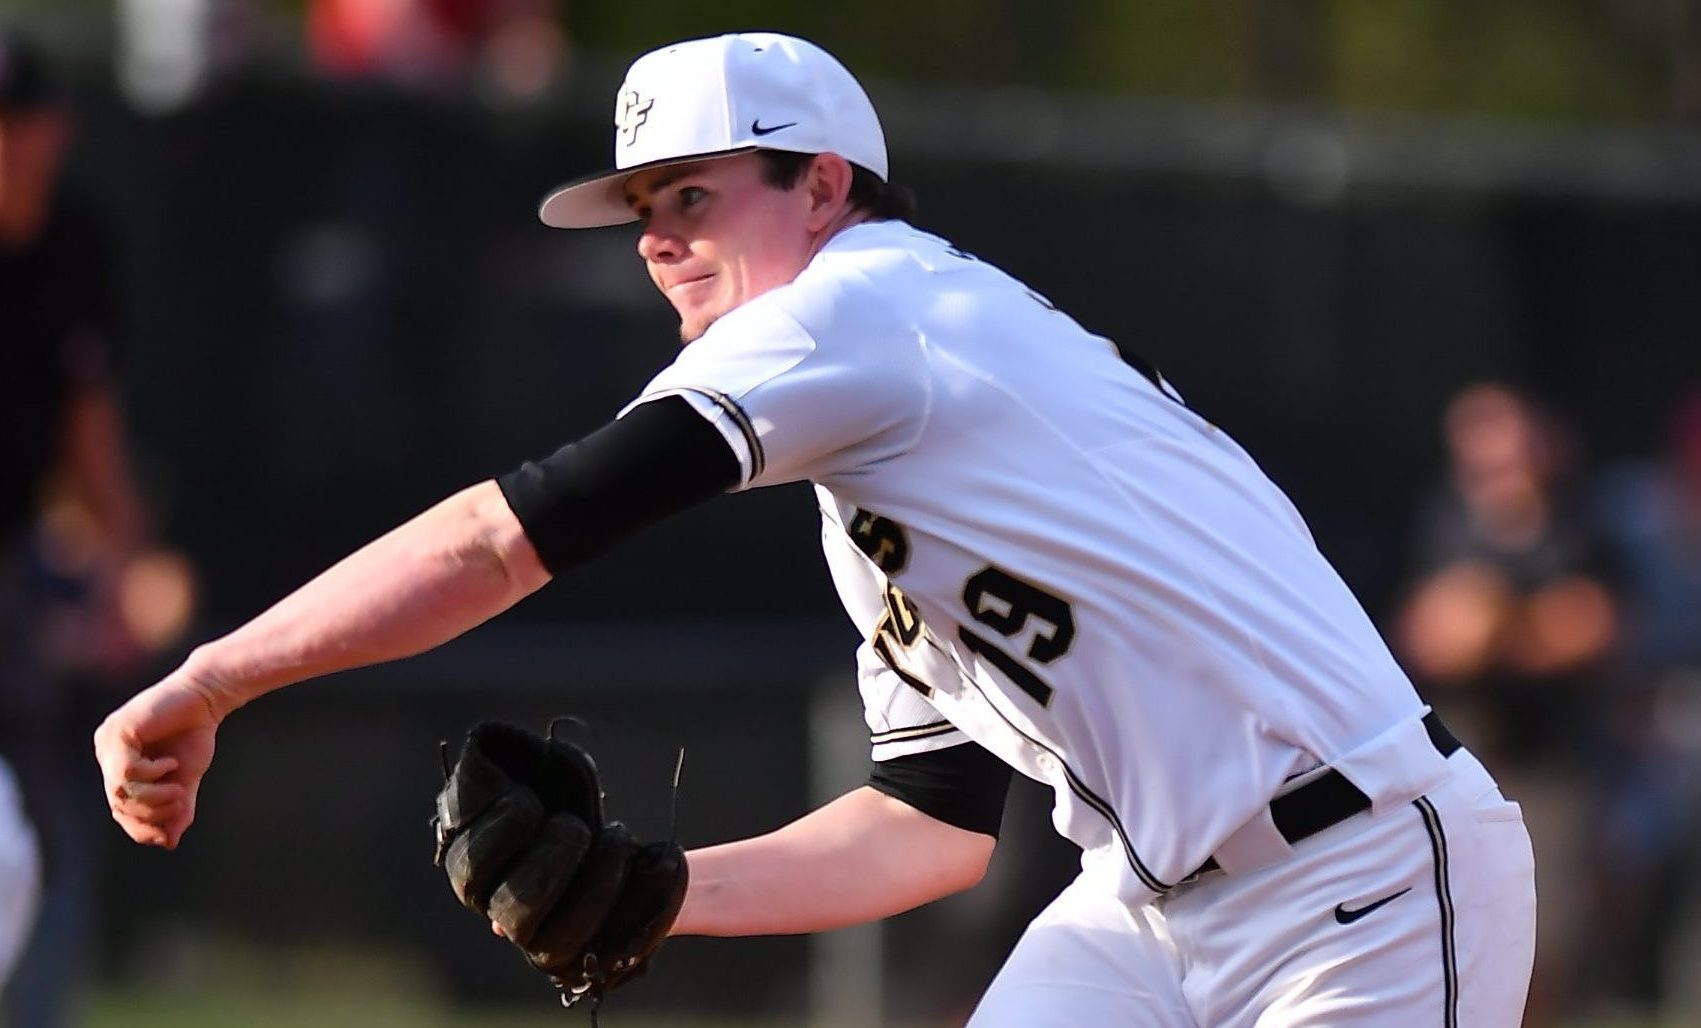 UCF starting pitcher Joe Sheridan will look to pick up where he left off in 2017. (Photo: UCF Athletics)